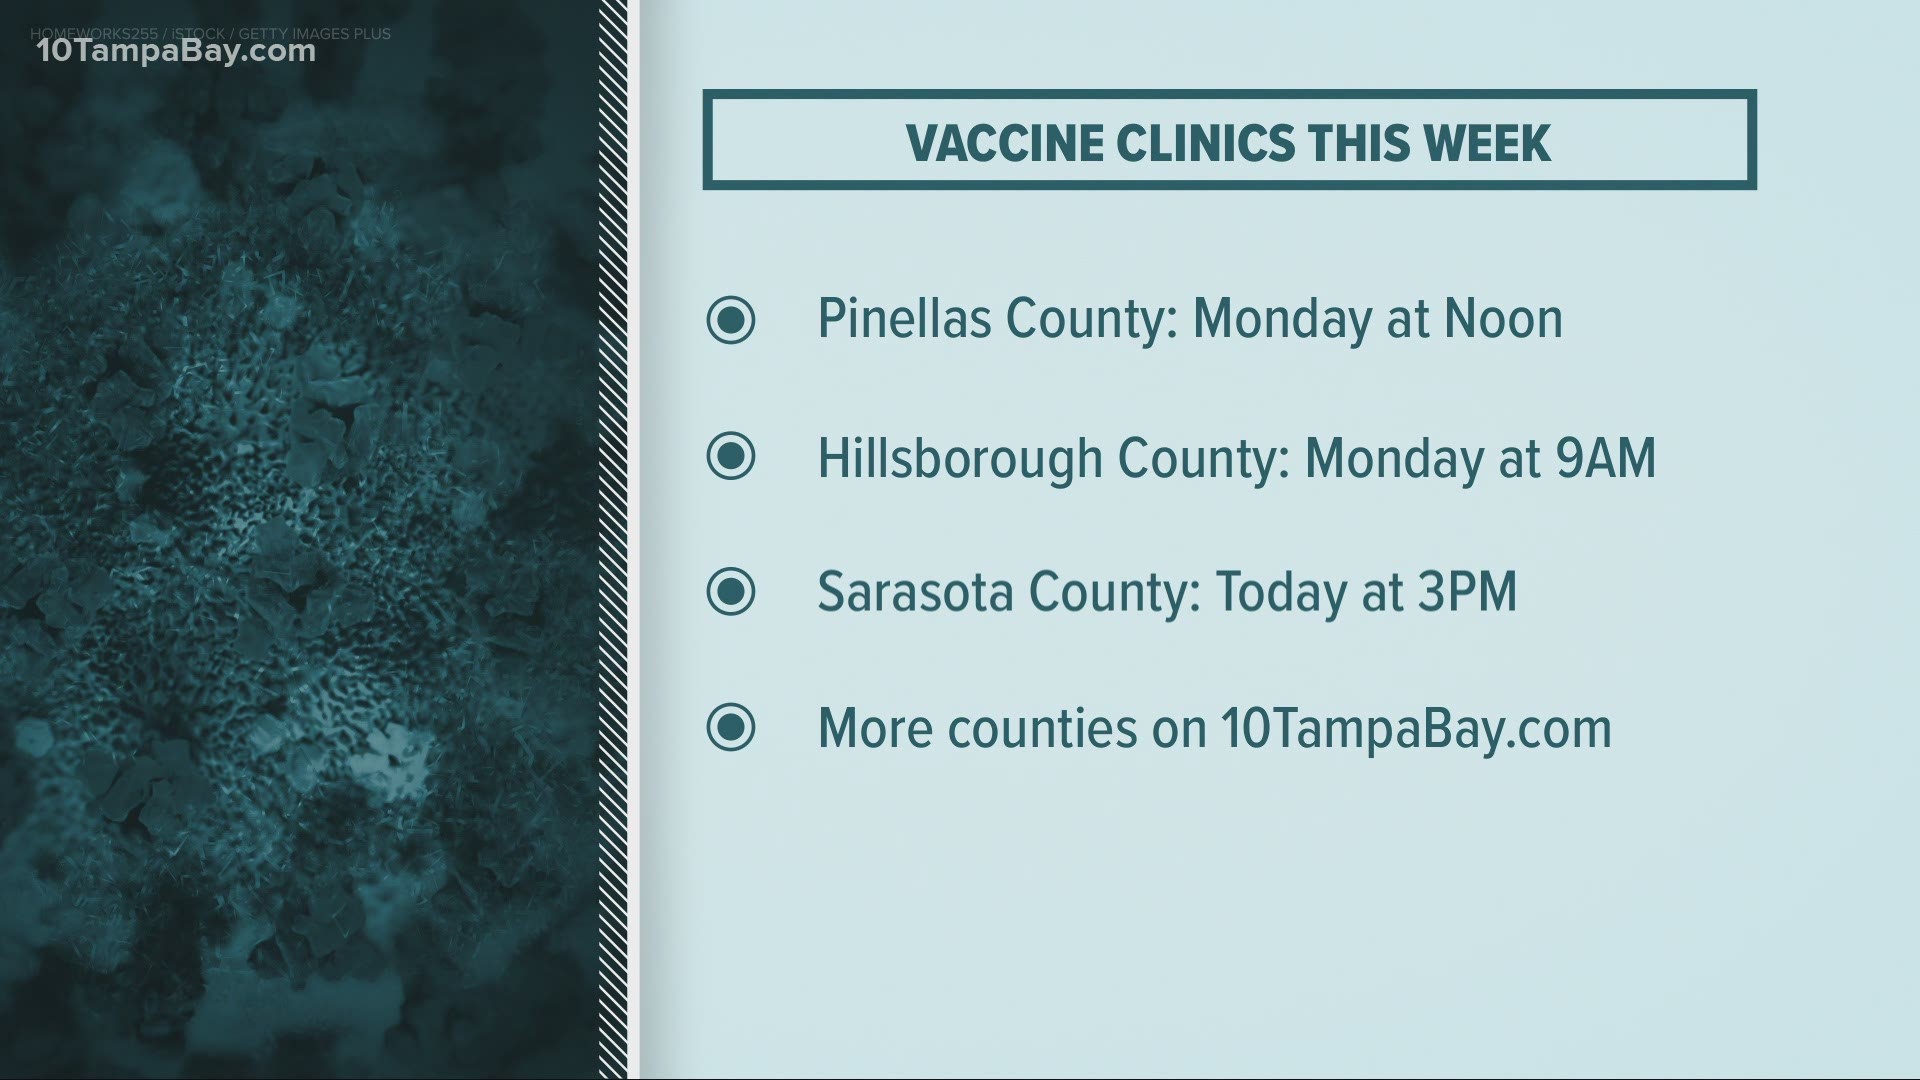 Florida Gov. Ron DeSantis signed an executive order to ensure senior citizens are the top priority when it comes to receiving vaccine doses.